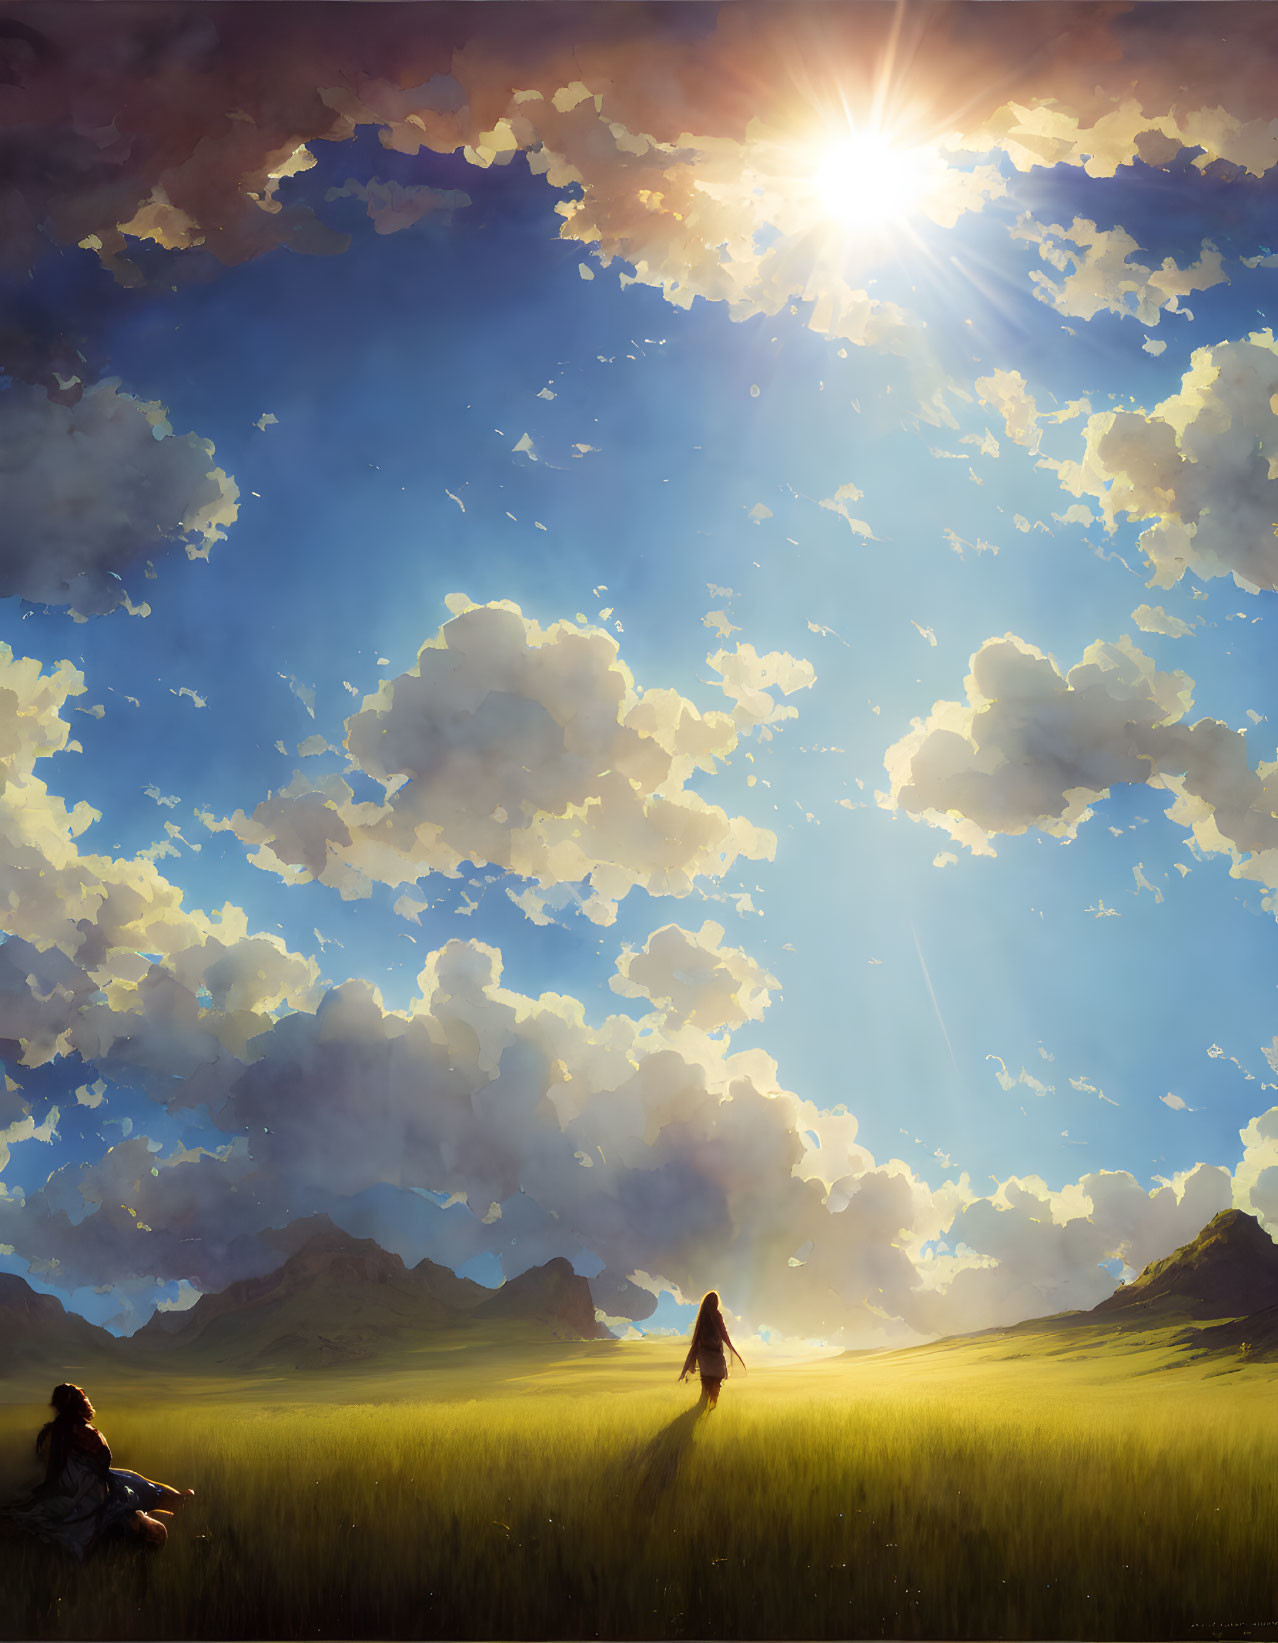 Serene field with two people, tall grass, majestic sky, and distant mountains.